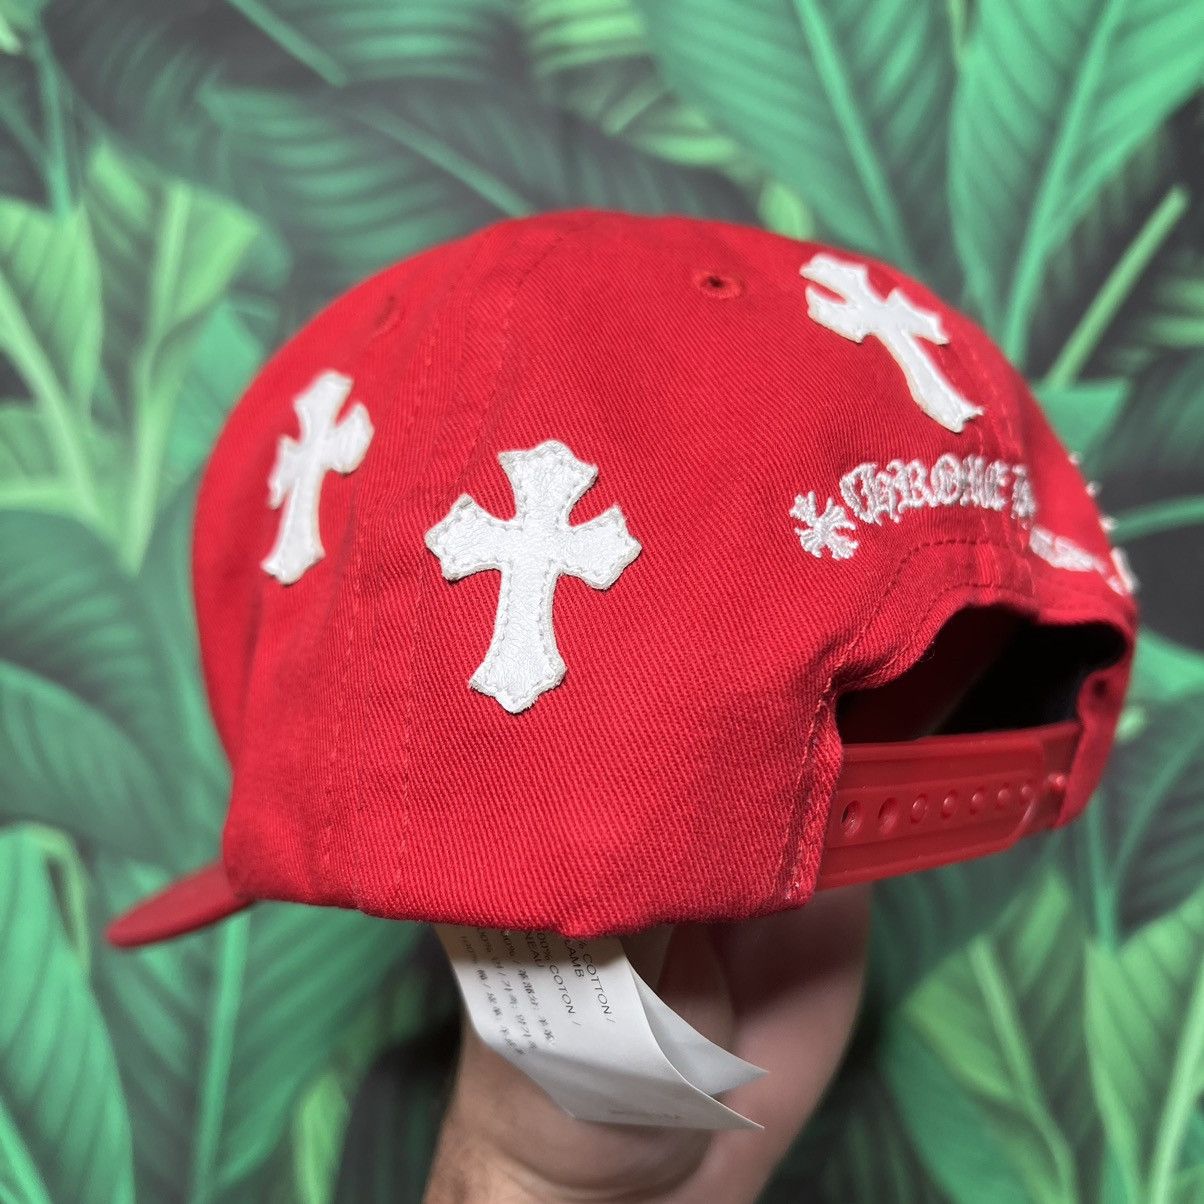 Chrome Hearts Leather Patch cross baseball cap Size ONE SIZE - 11 Thumbnail